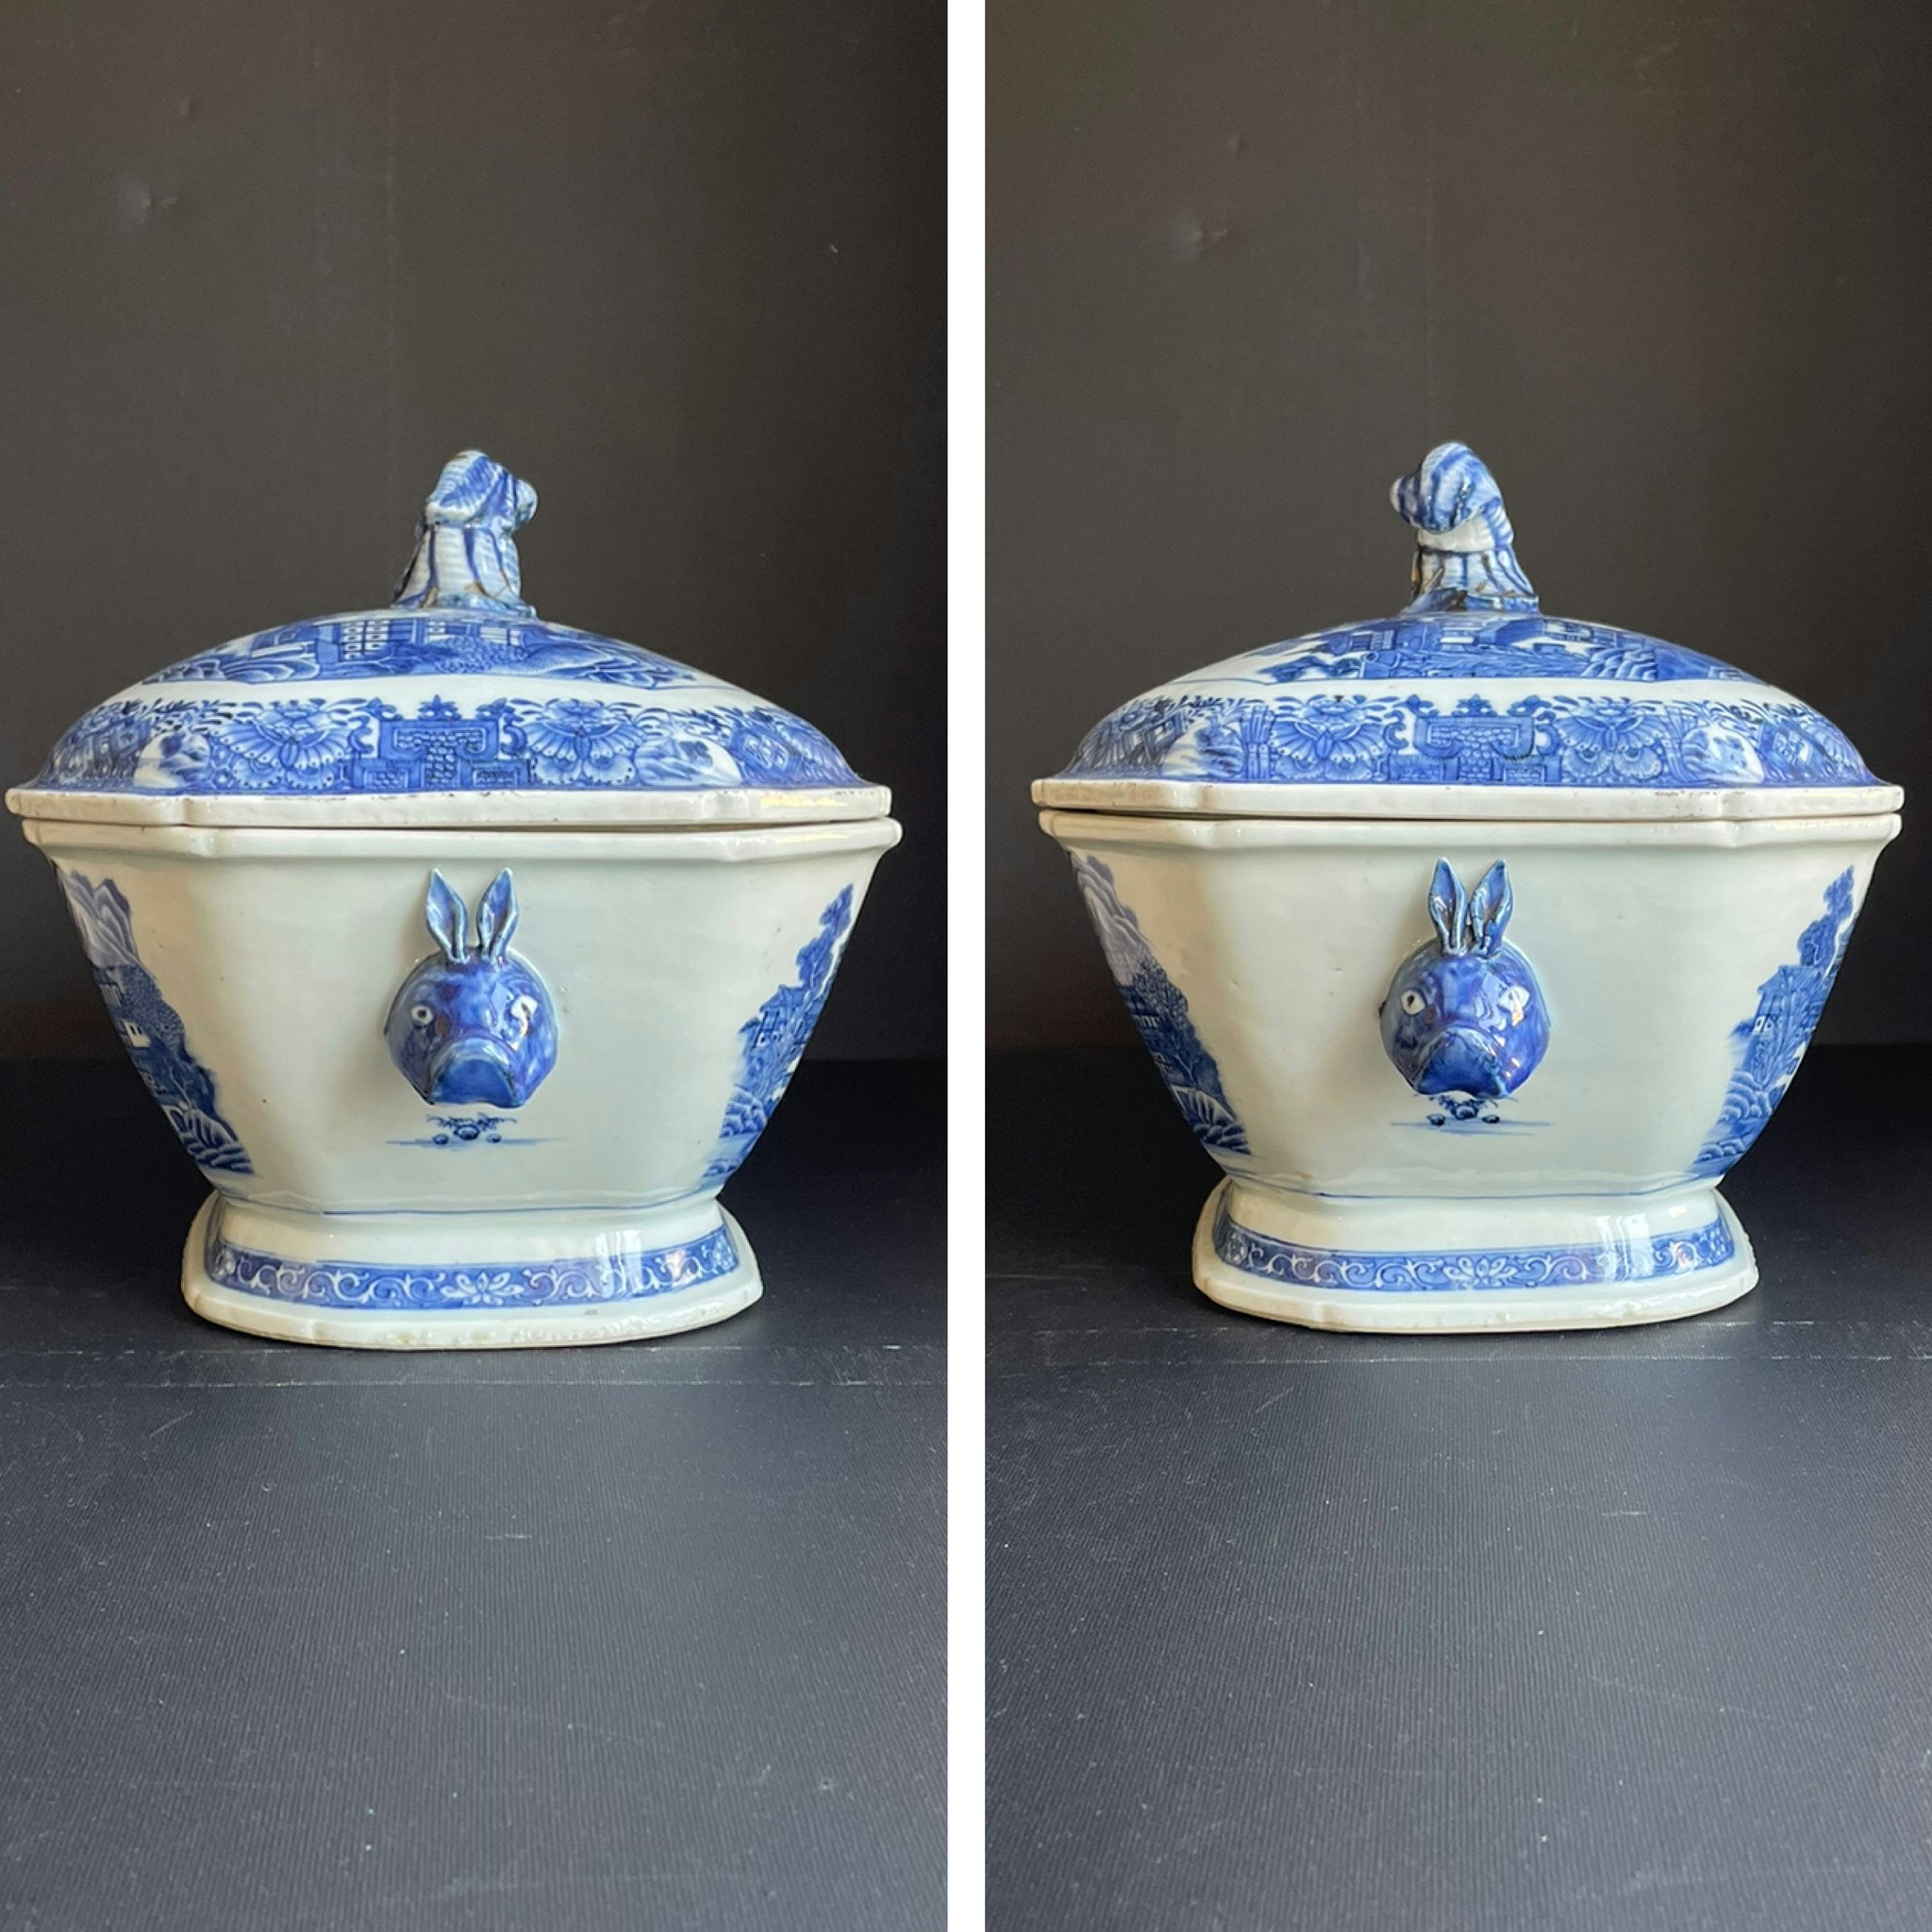 A Chinese export tureen in underglazed blue & white Qianlong period, Qing #1013